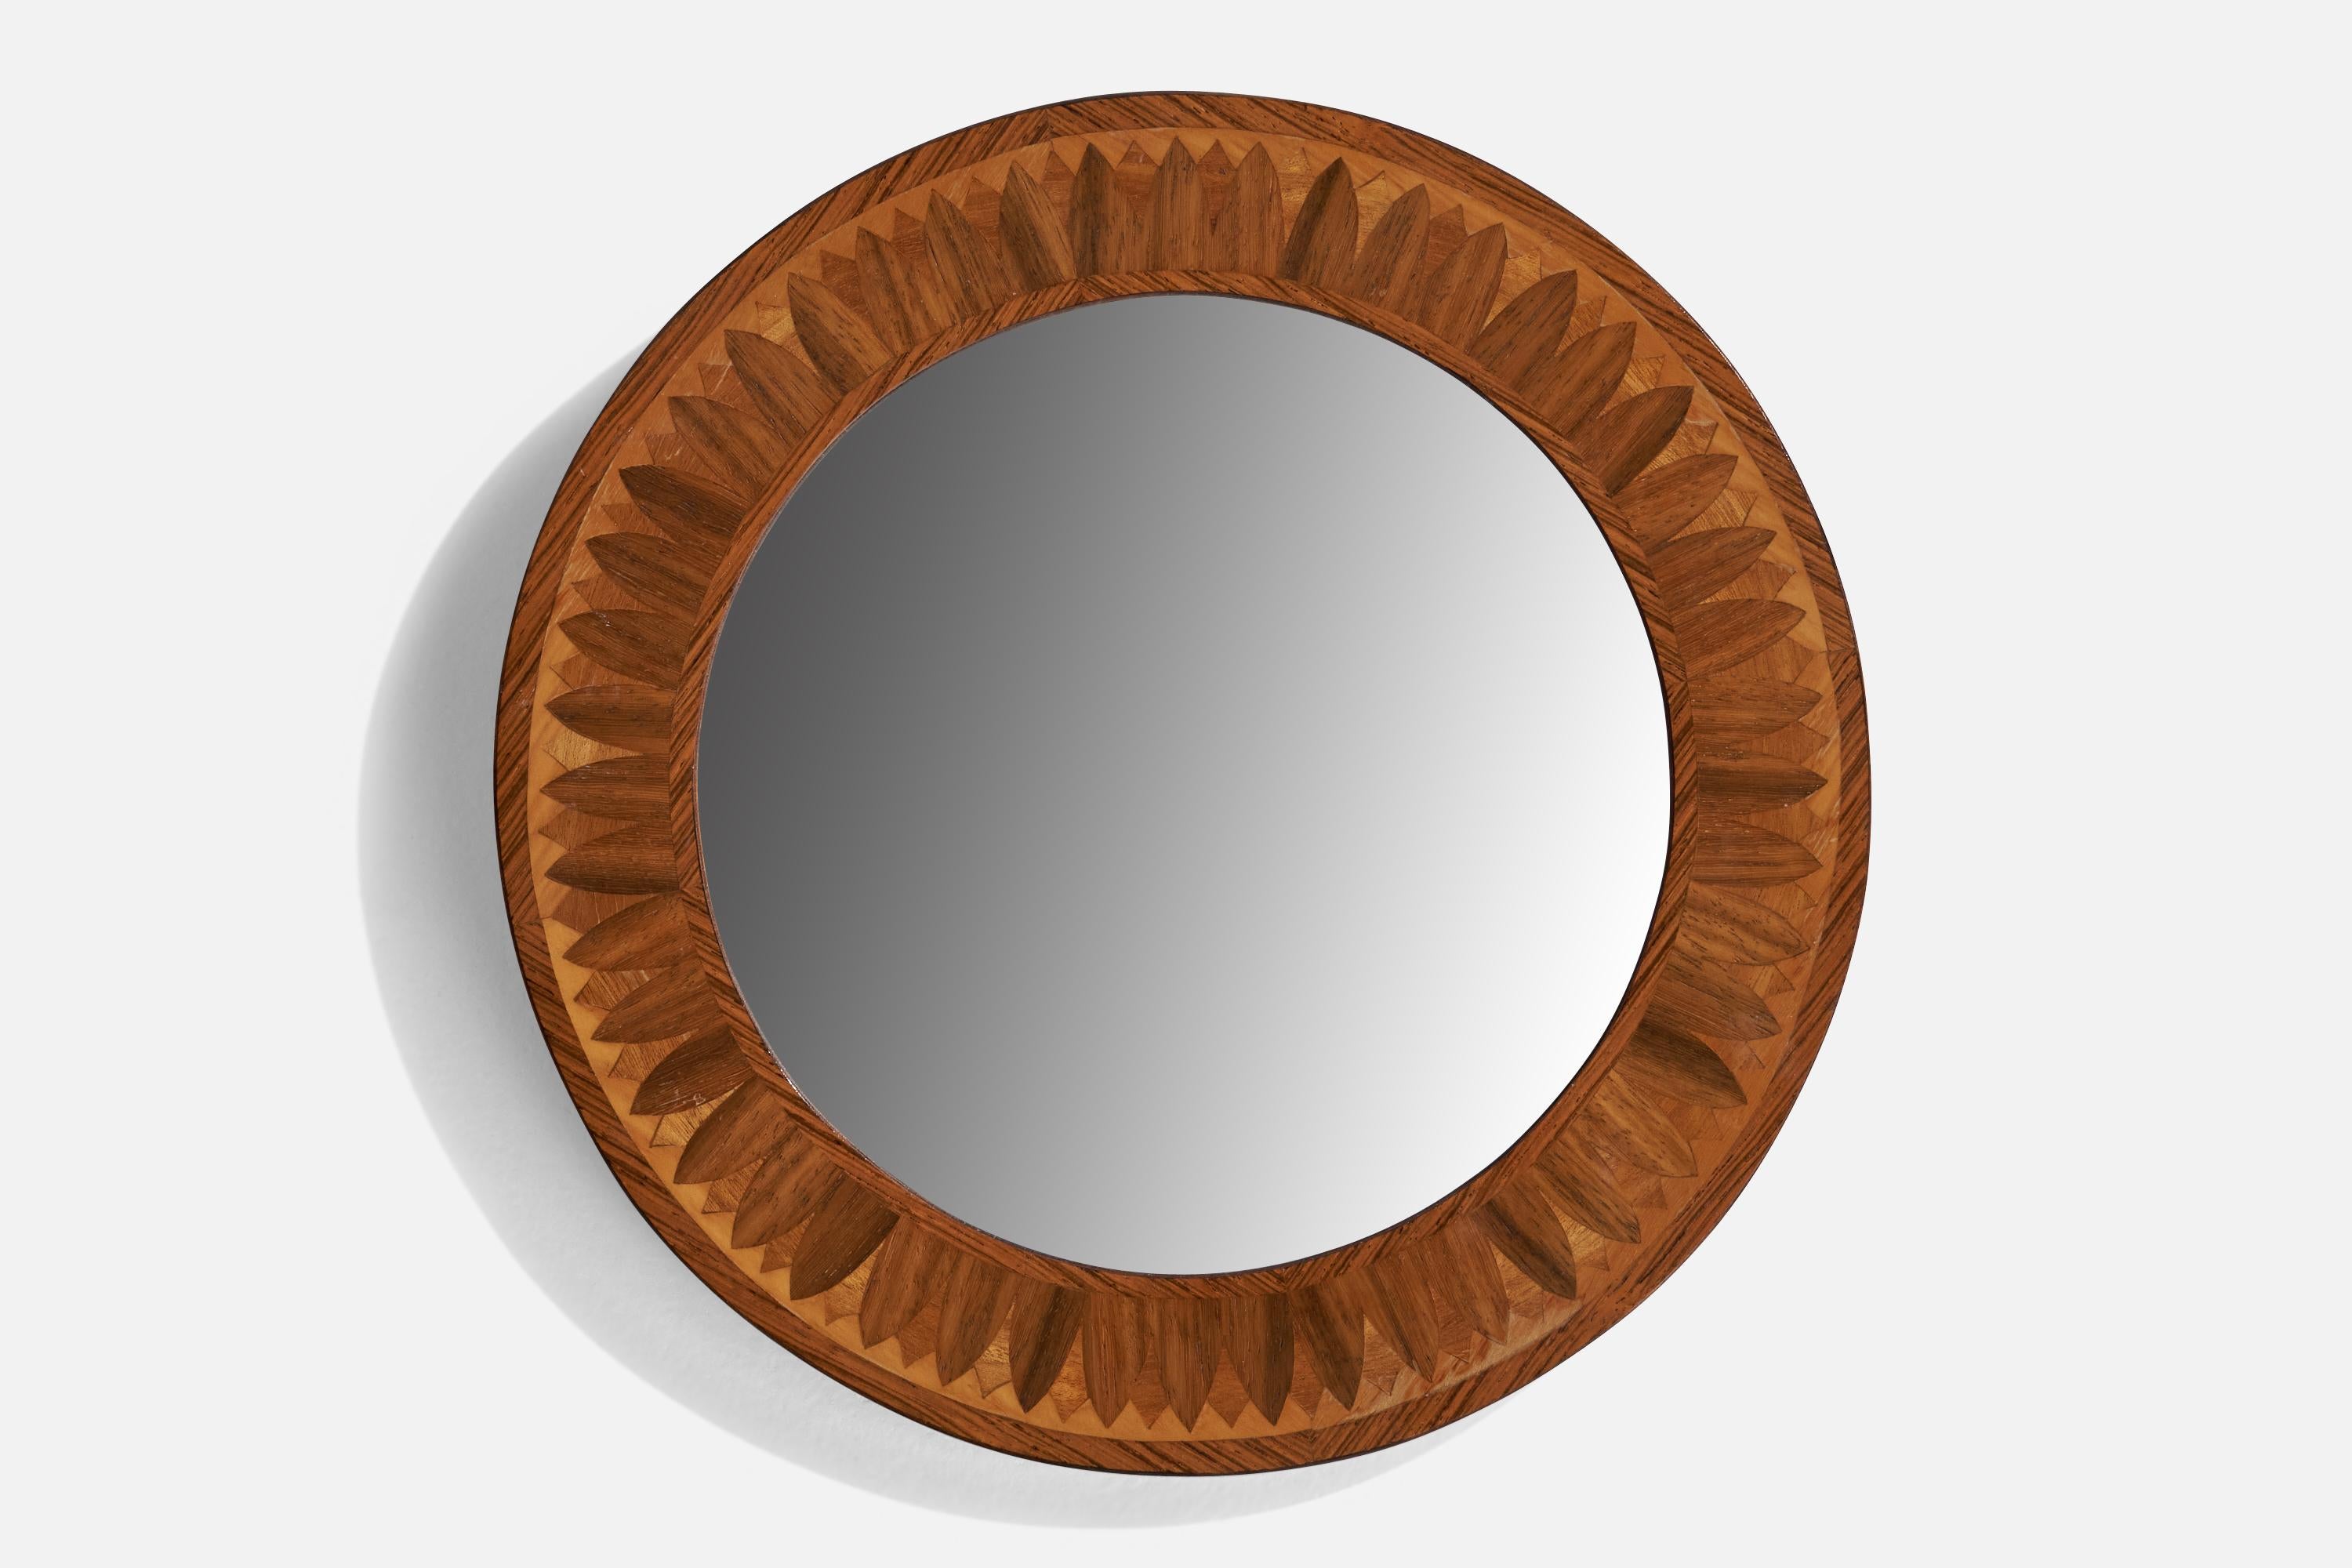 A wood inlay mirror designed and produced in Sweden, c. 1940s.